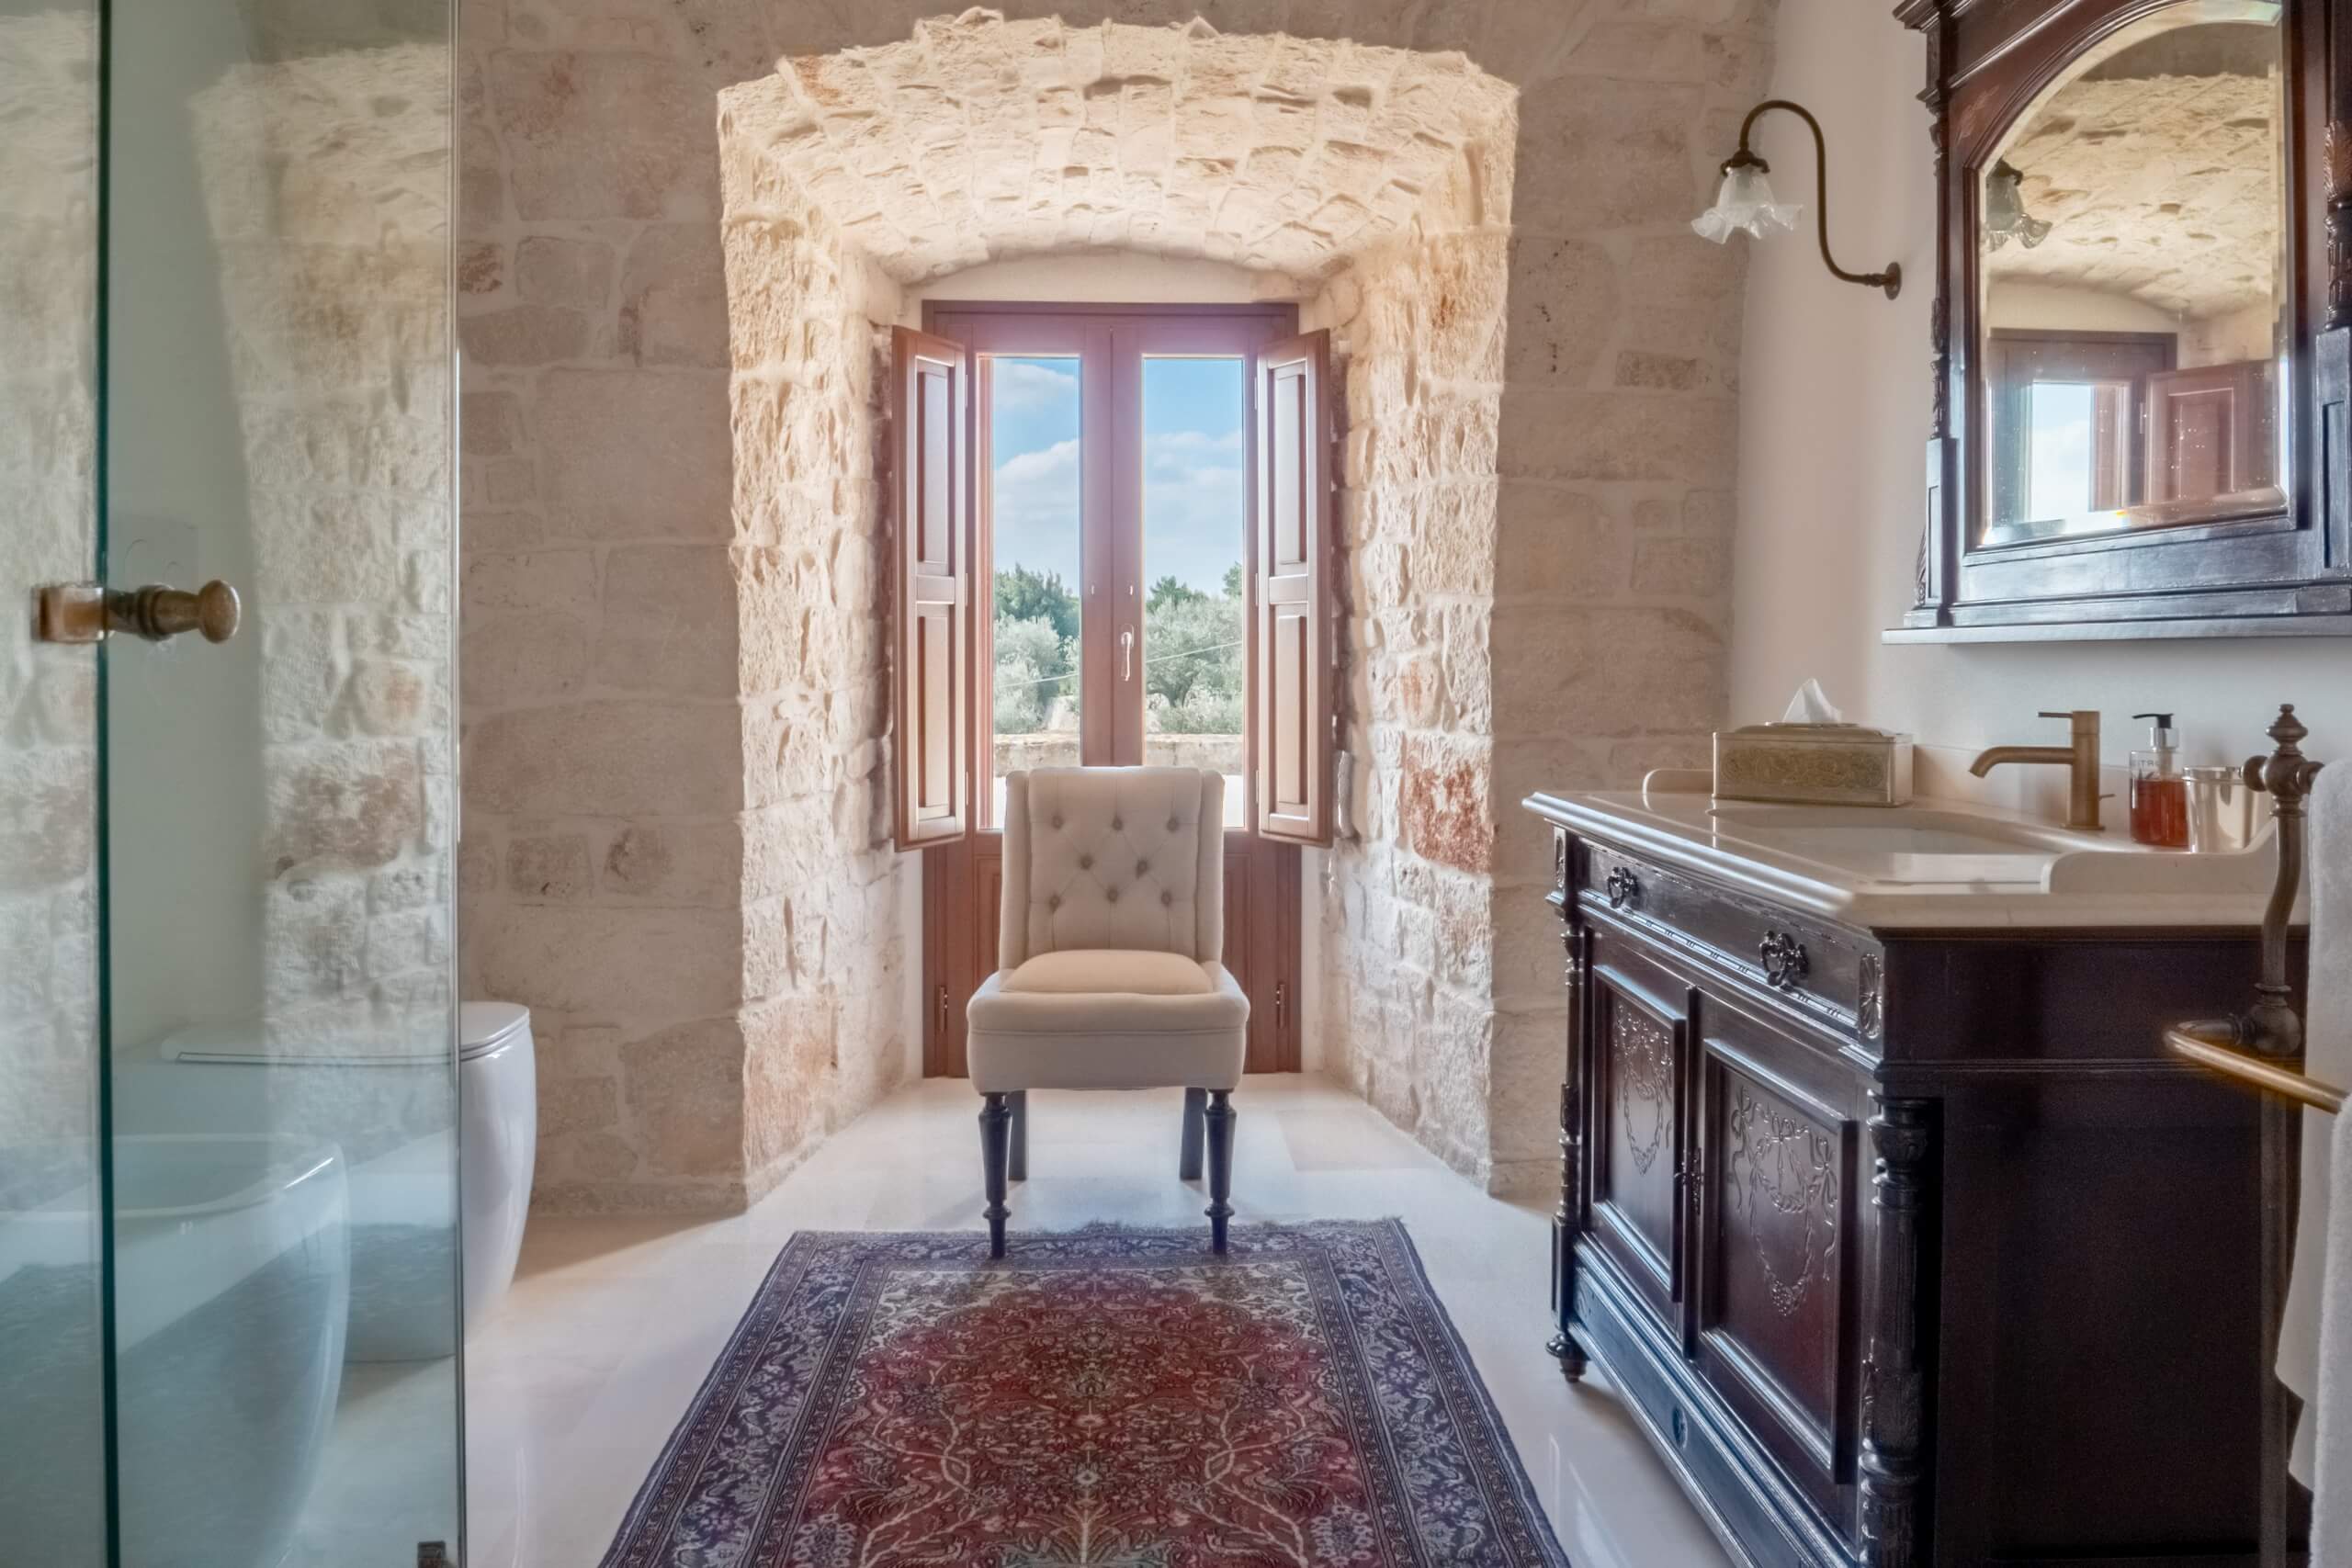 A large glass shower and a breathtaking view make this place welcoming and evocative.